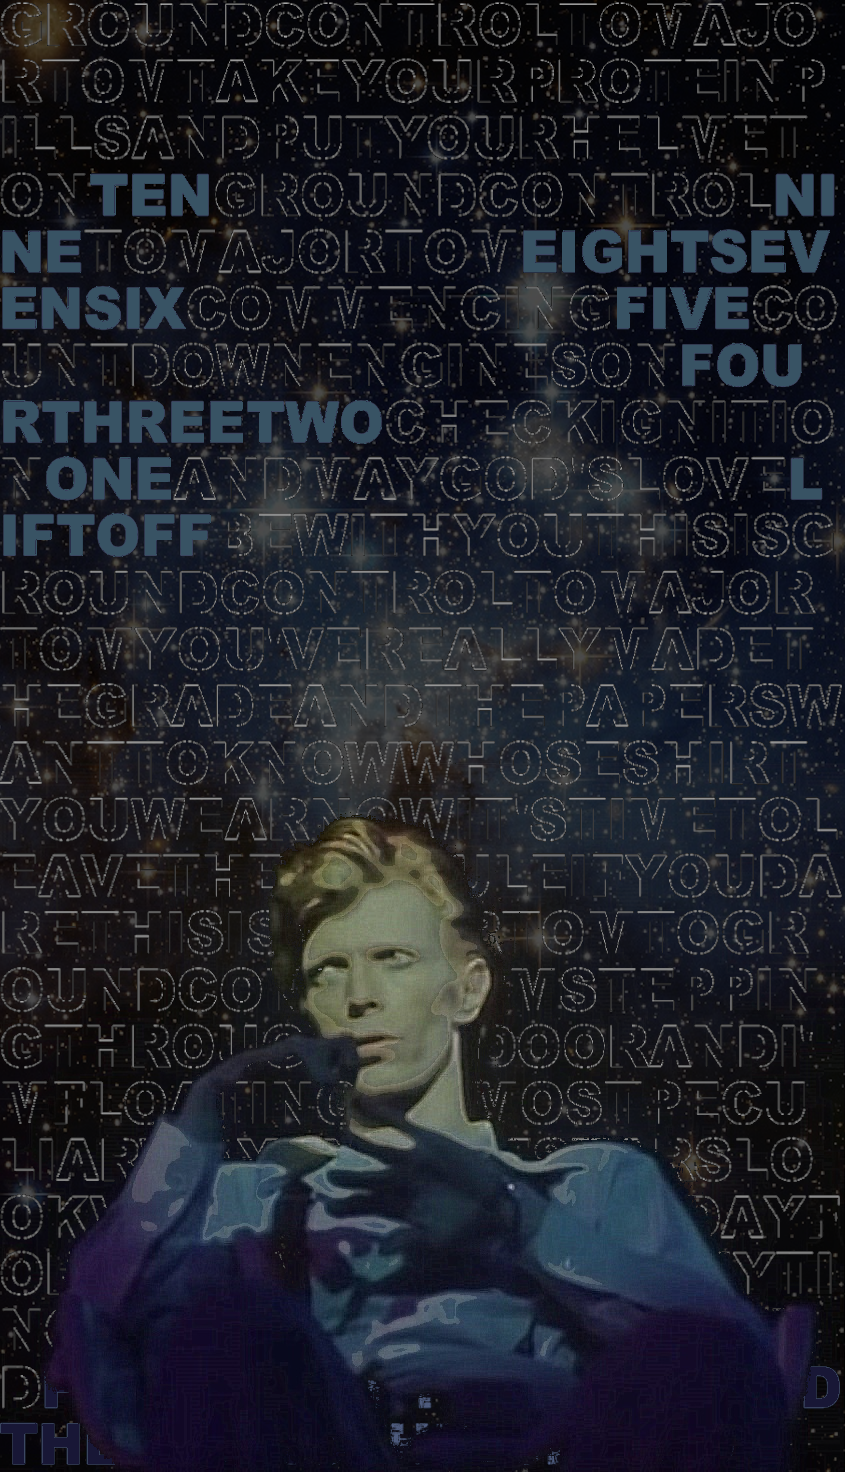 David Bowie Wallpapers